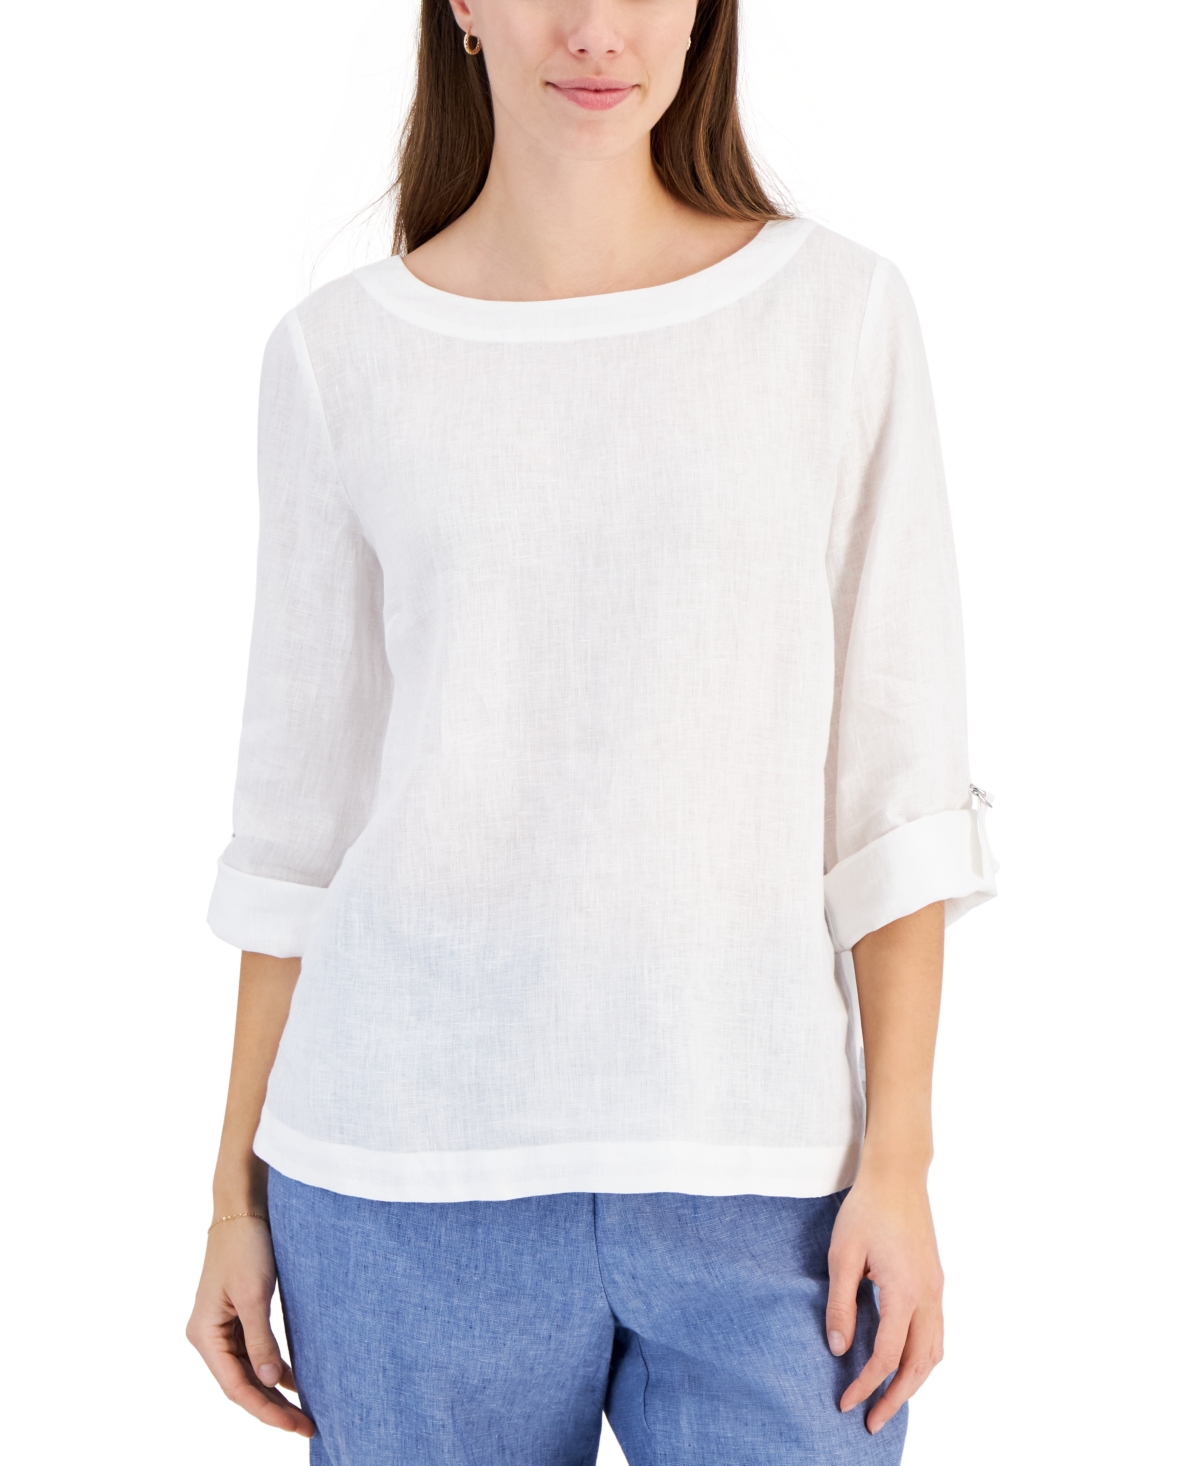 Women's 100% Linen D-Ring Top, Created for Macy's - Bright White